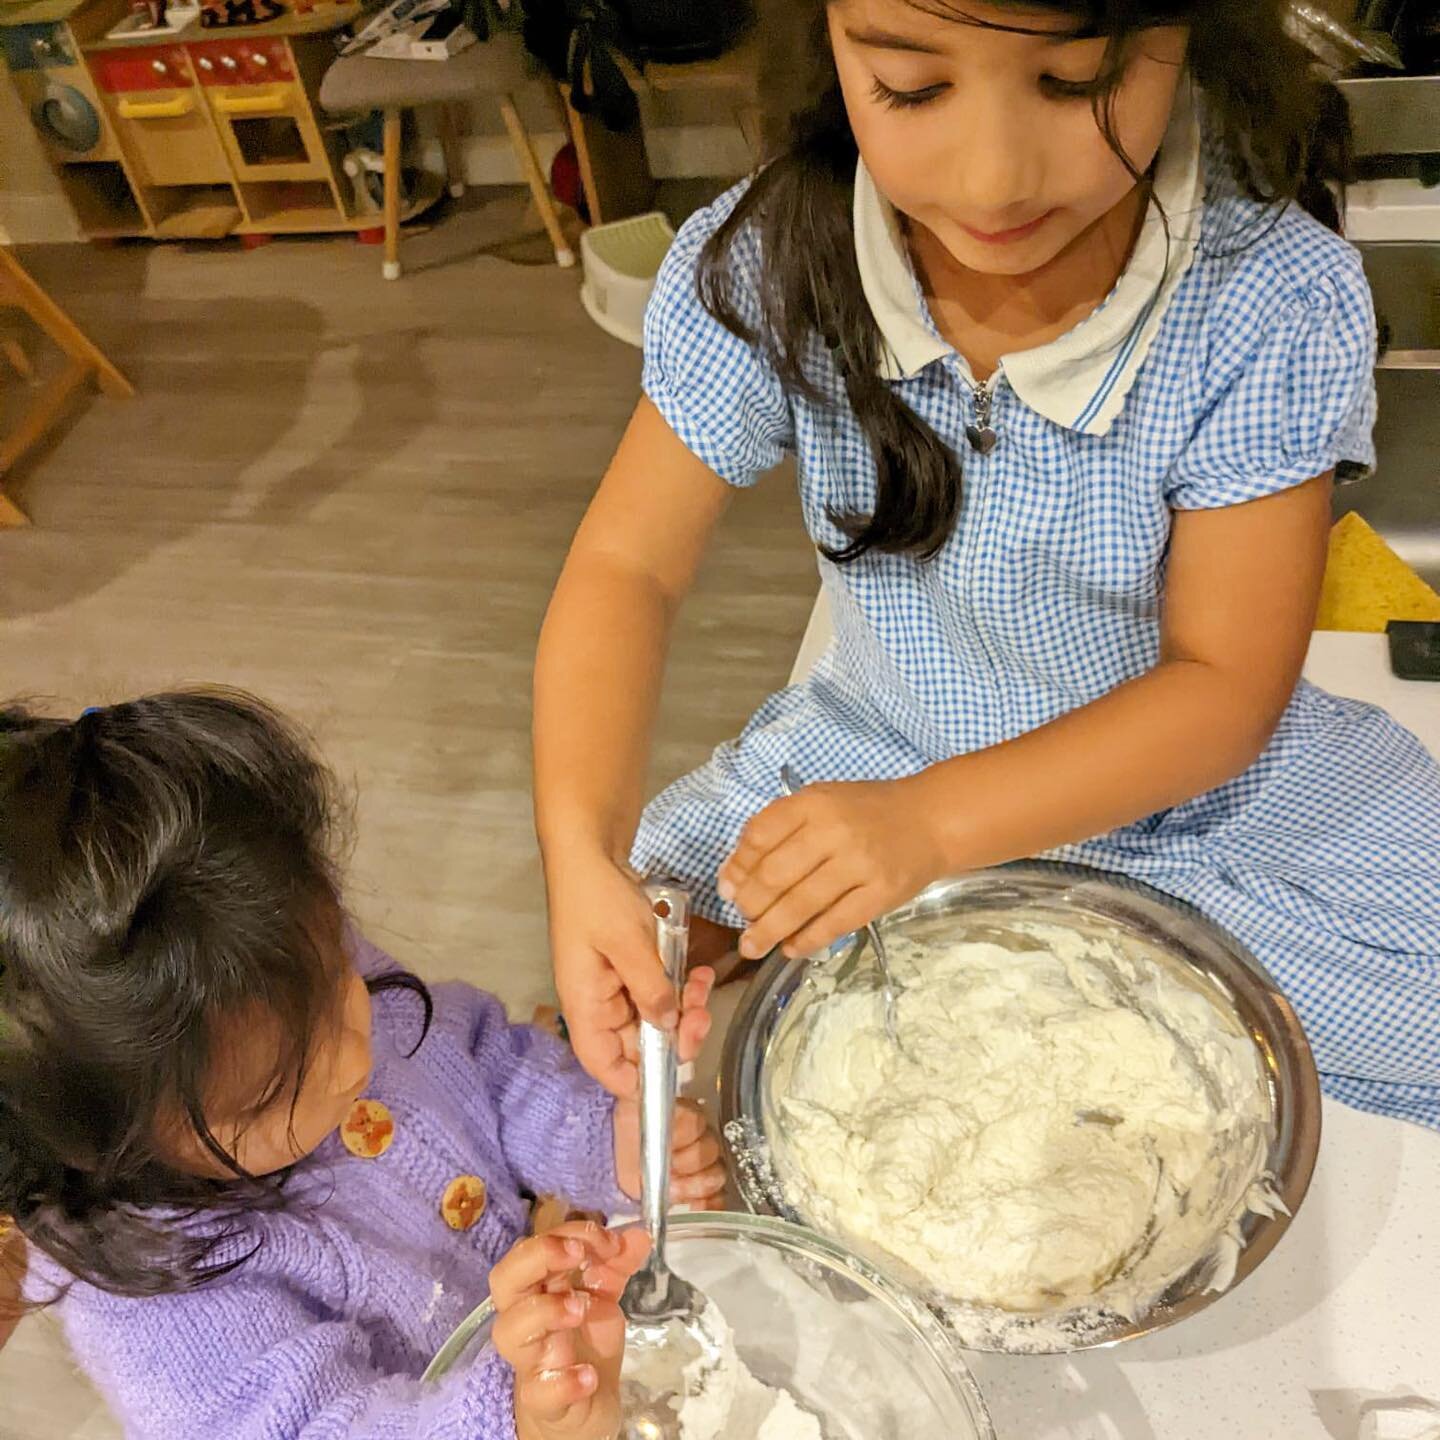 👧👦 Bring the kids to learn how to make 2 ingredient flatbreads this Saturday at @victoriaparkptfa Food Festival! 🧑&zwj;🍳 Fun, tasty and only a little bit messy! 😝

We&rsquo;ll be running flatbread making sessions for kids, demonstrating how to m